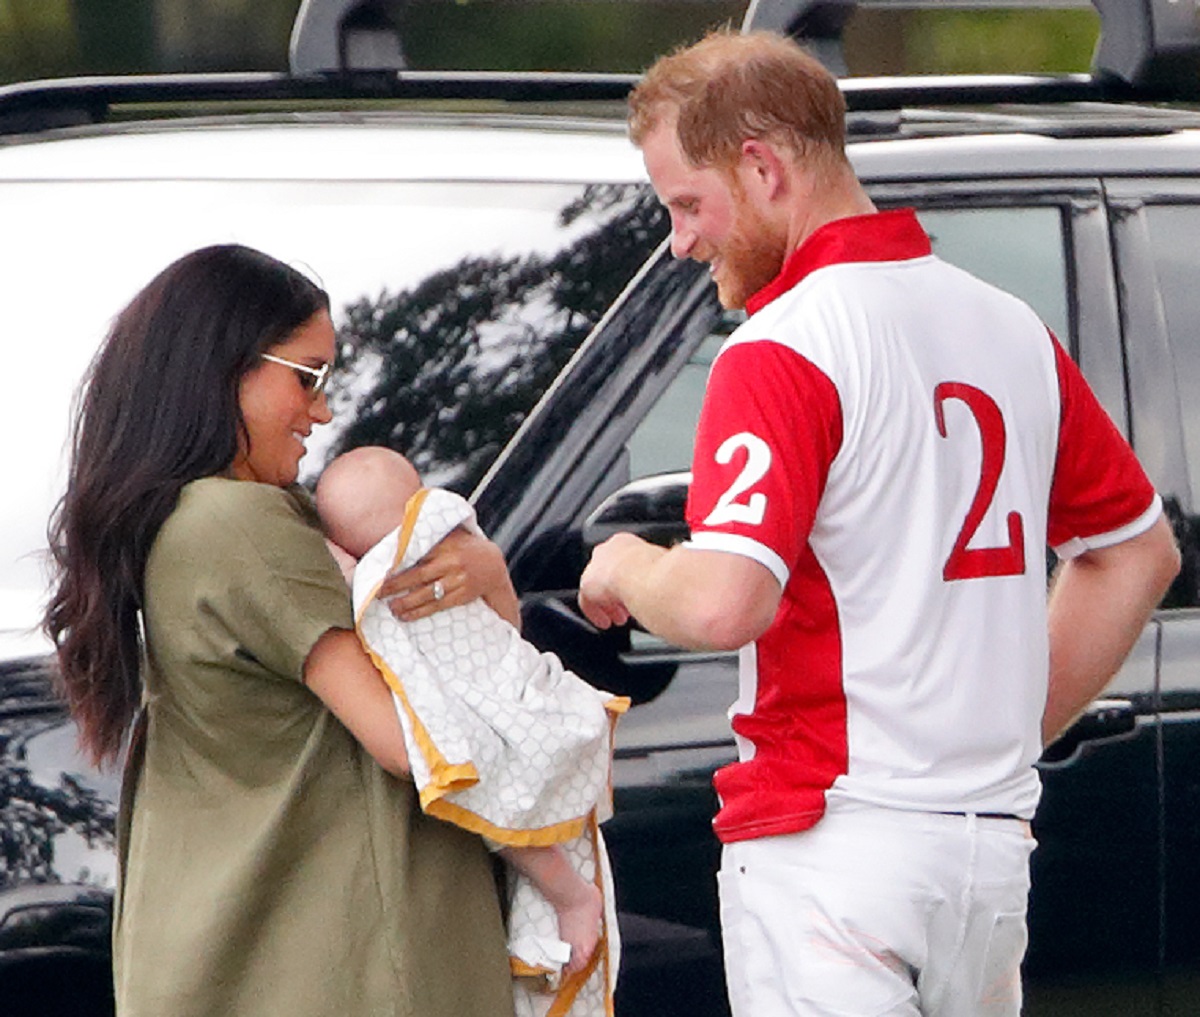 Meghan Markle with Prince Harry as she holds their son, Archie Harrison Mountbatten-Windsor, at a charity polo match